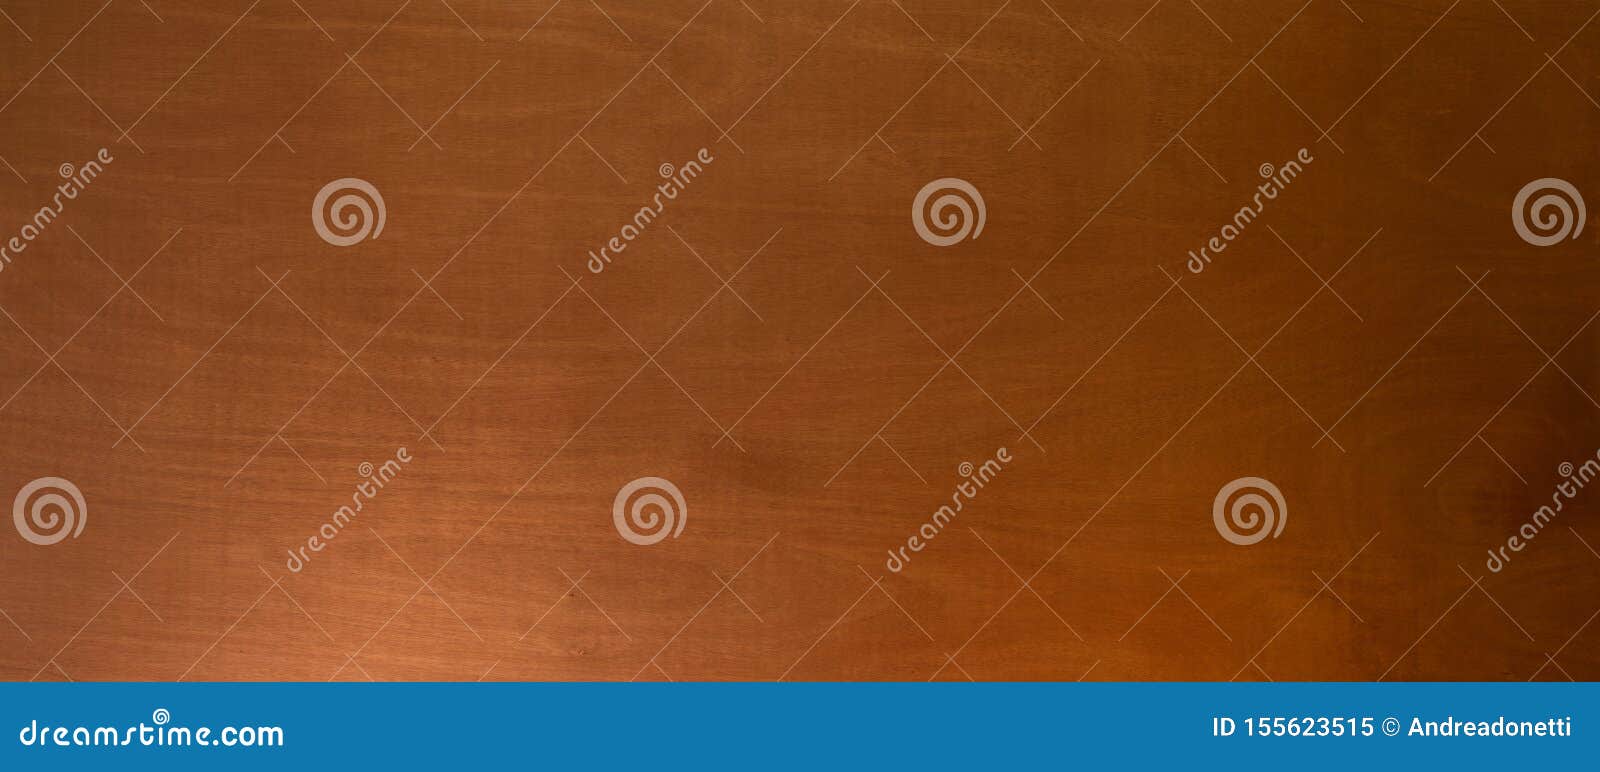 natural smooth wood grain texture as background